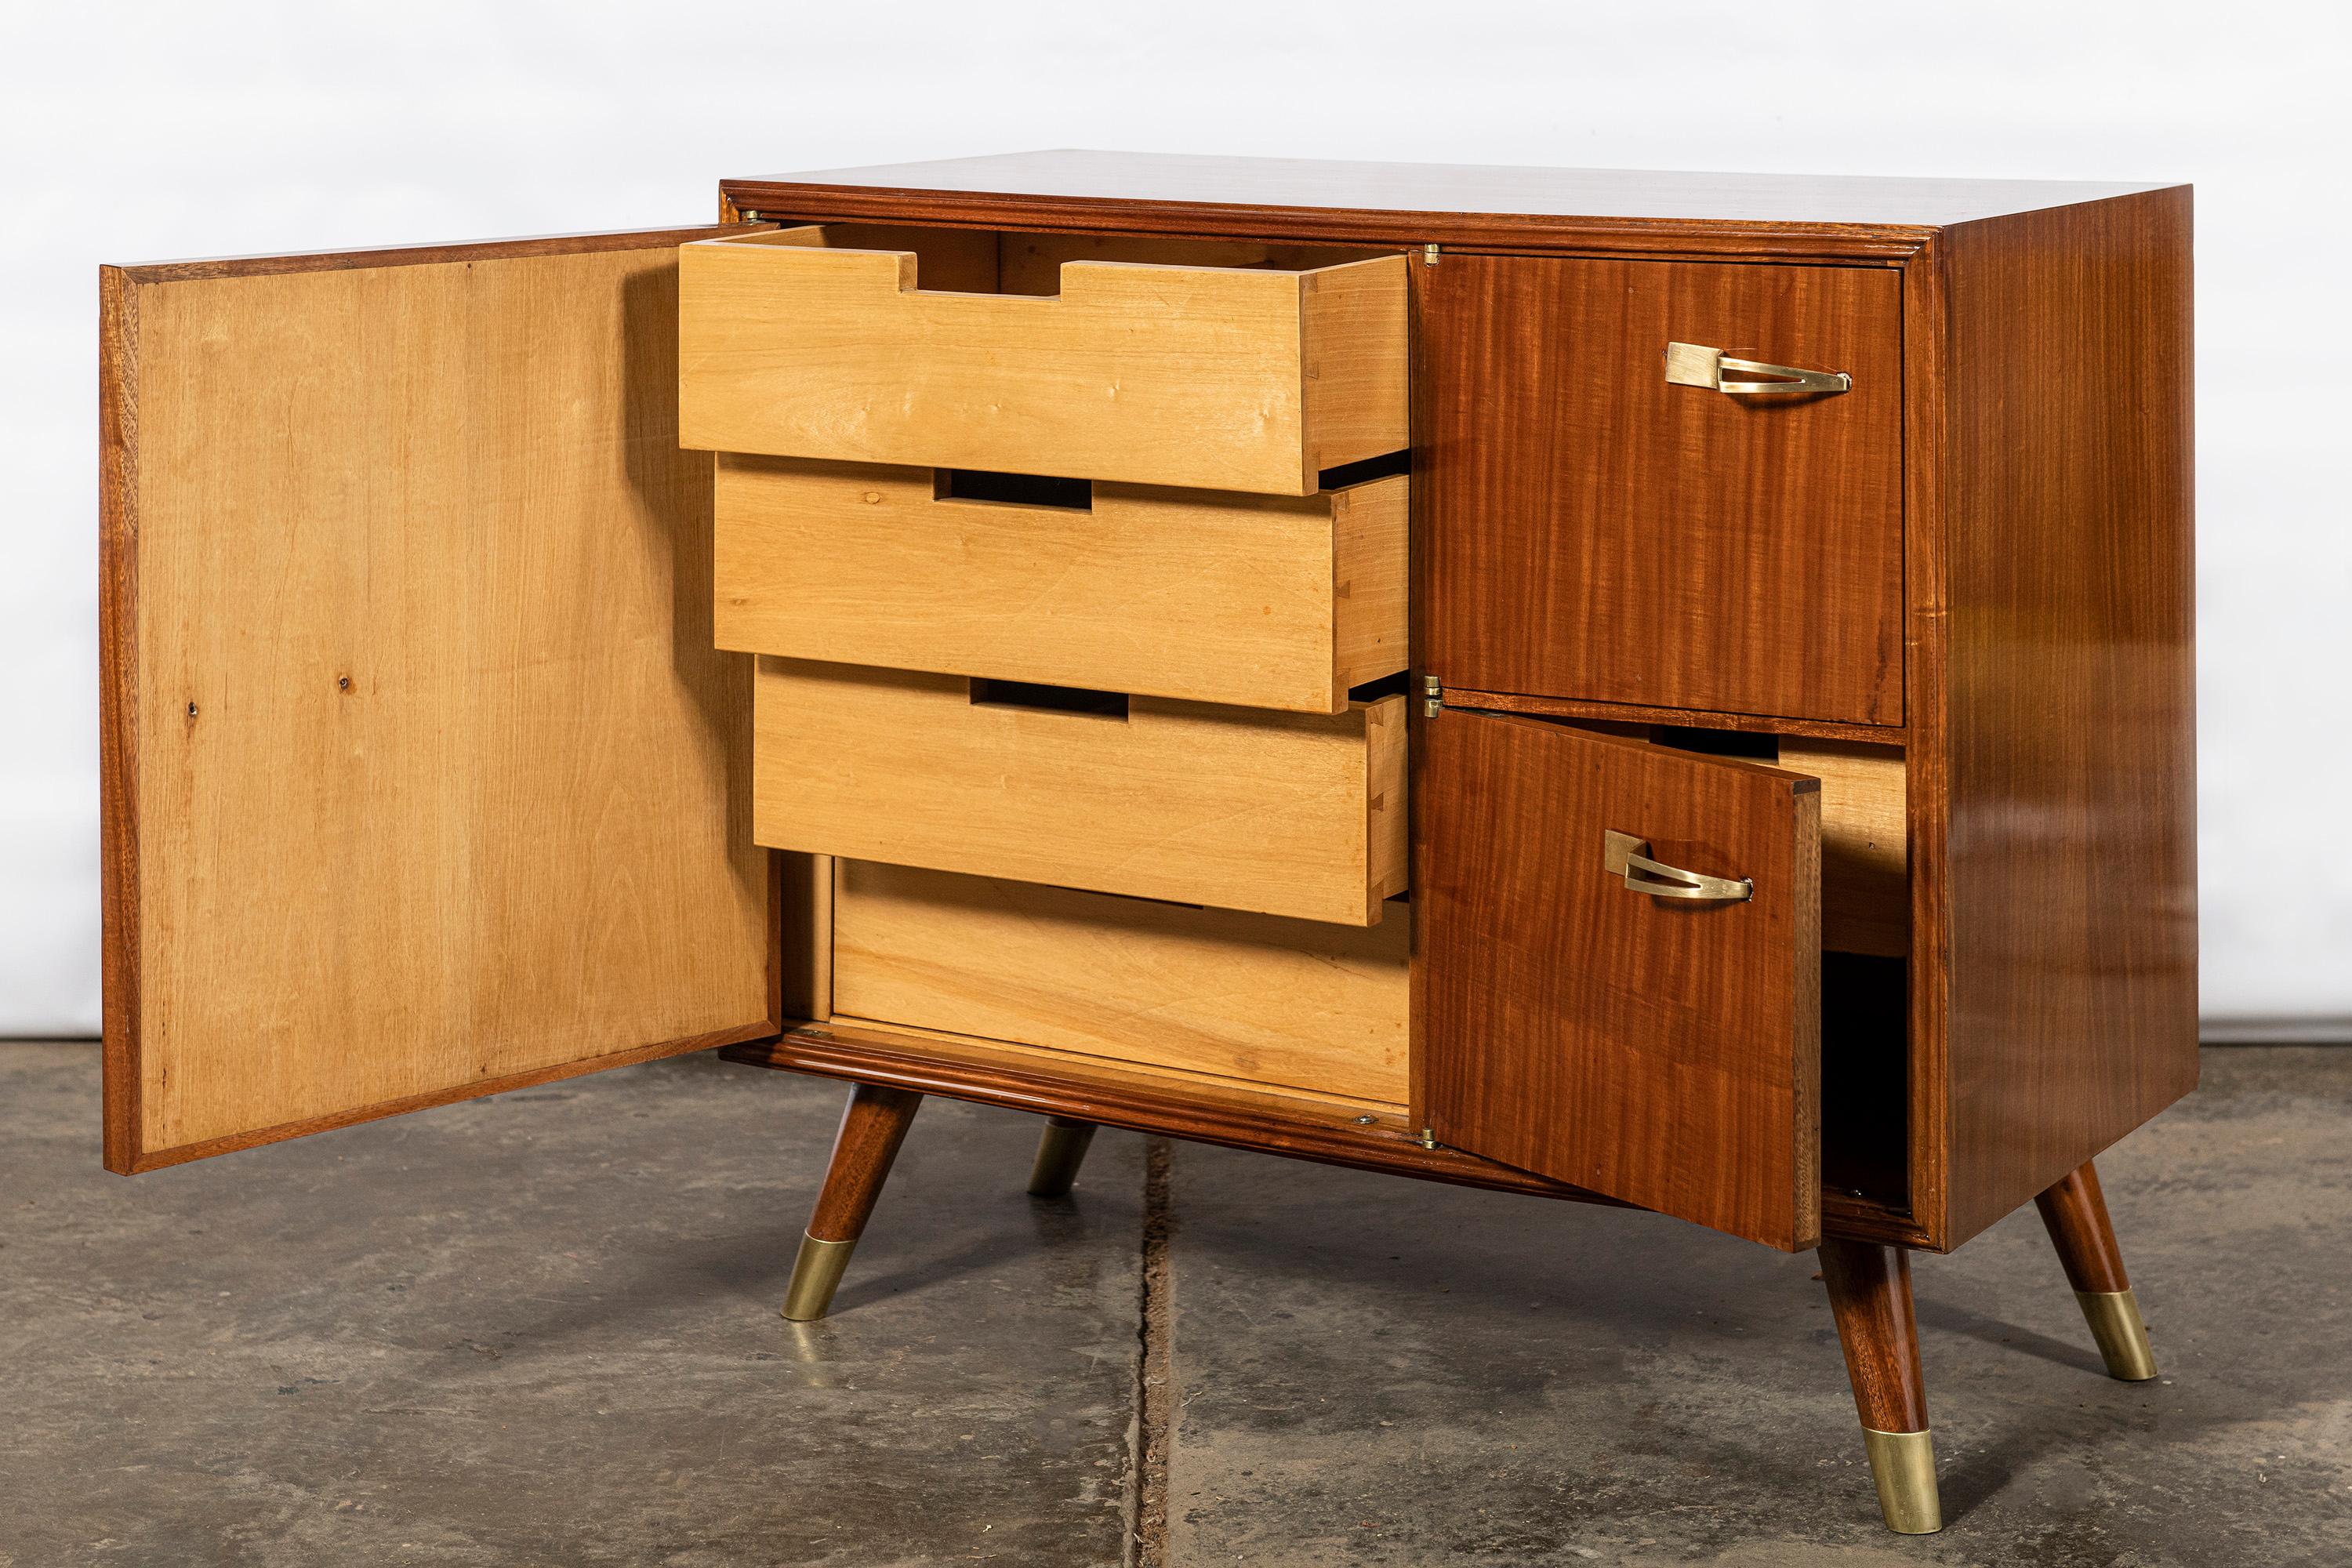 Argentine Pair of Wood, Leather and Bronze Night Stands by Englander & Bonta, Argentina